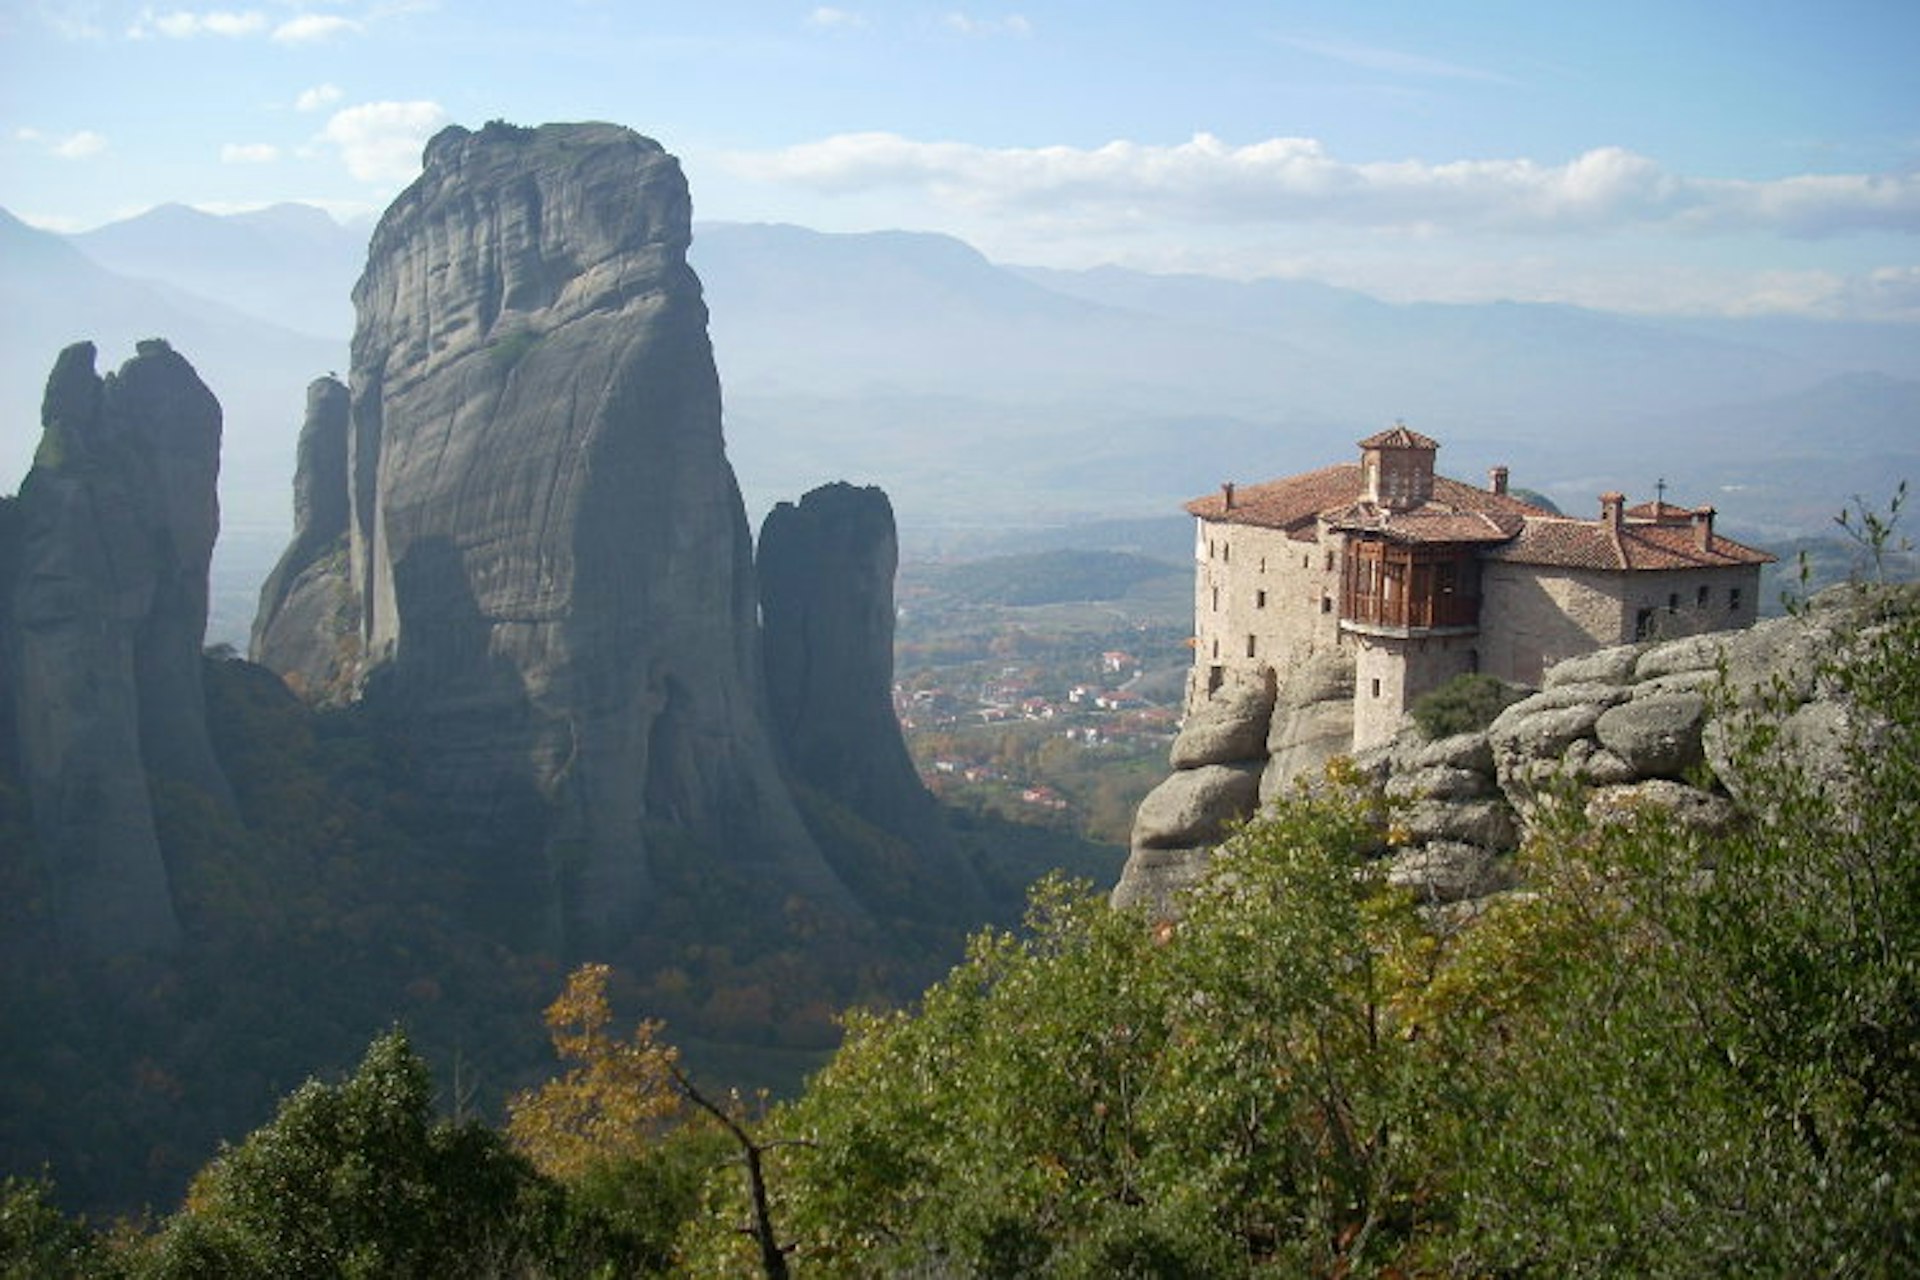 Soaring rock pinnacles at Meteora. Image by Alexis Averbuck / Lonely Planet